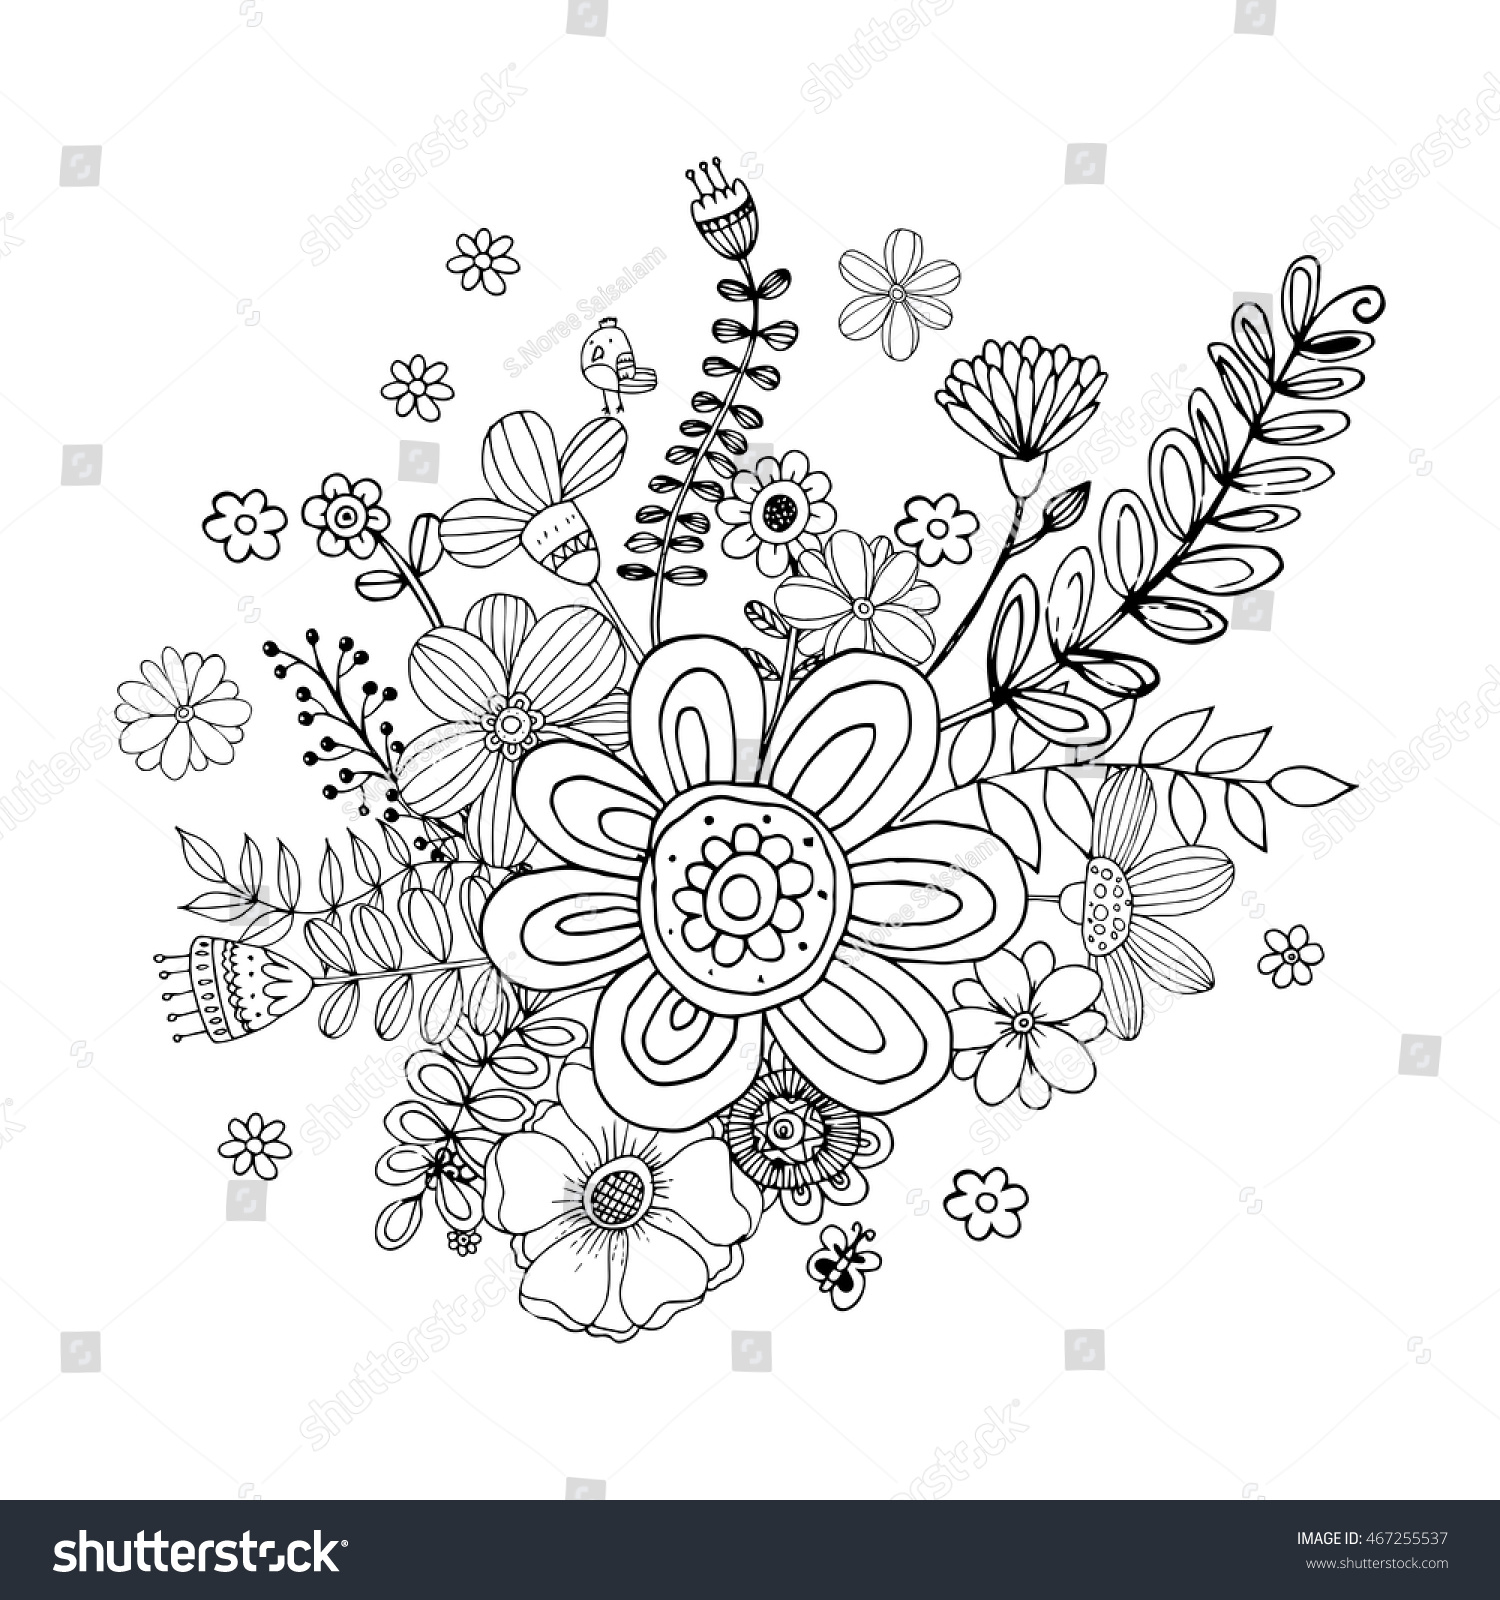 Flower Doodle Drawing Freehand Vector Doodle Stock Vector Royalty